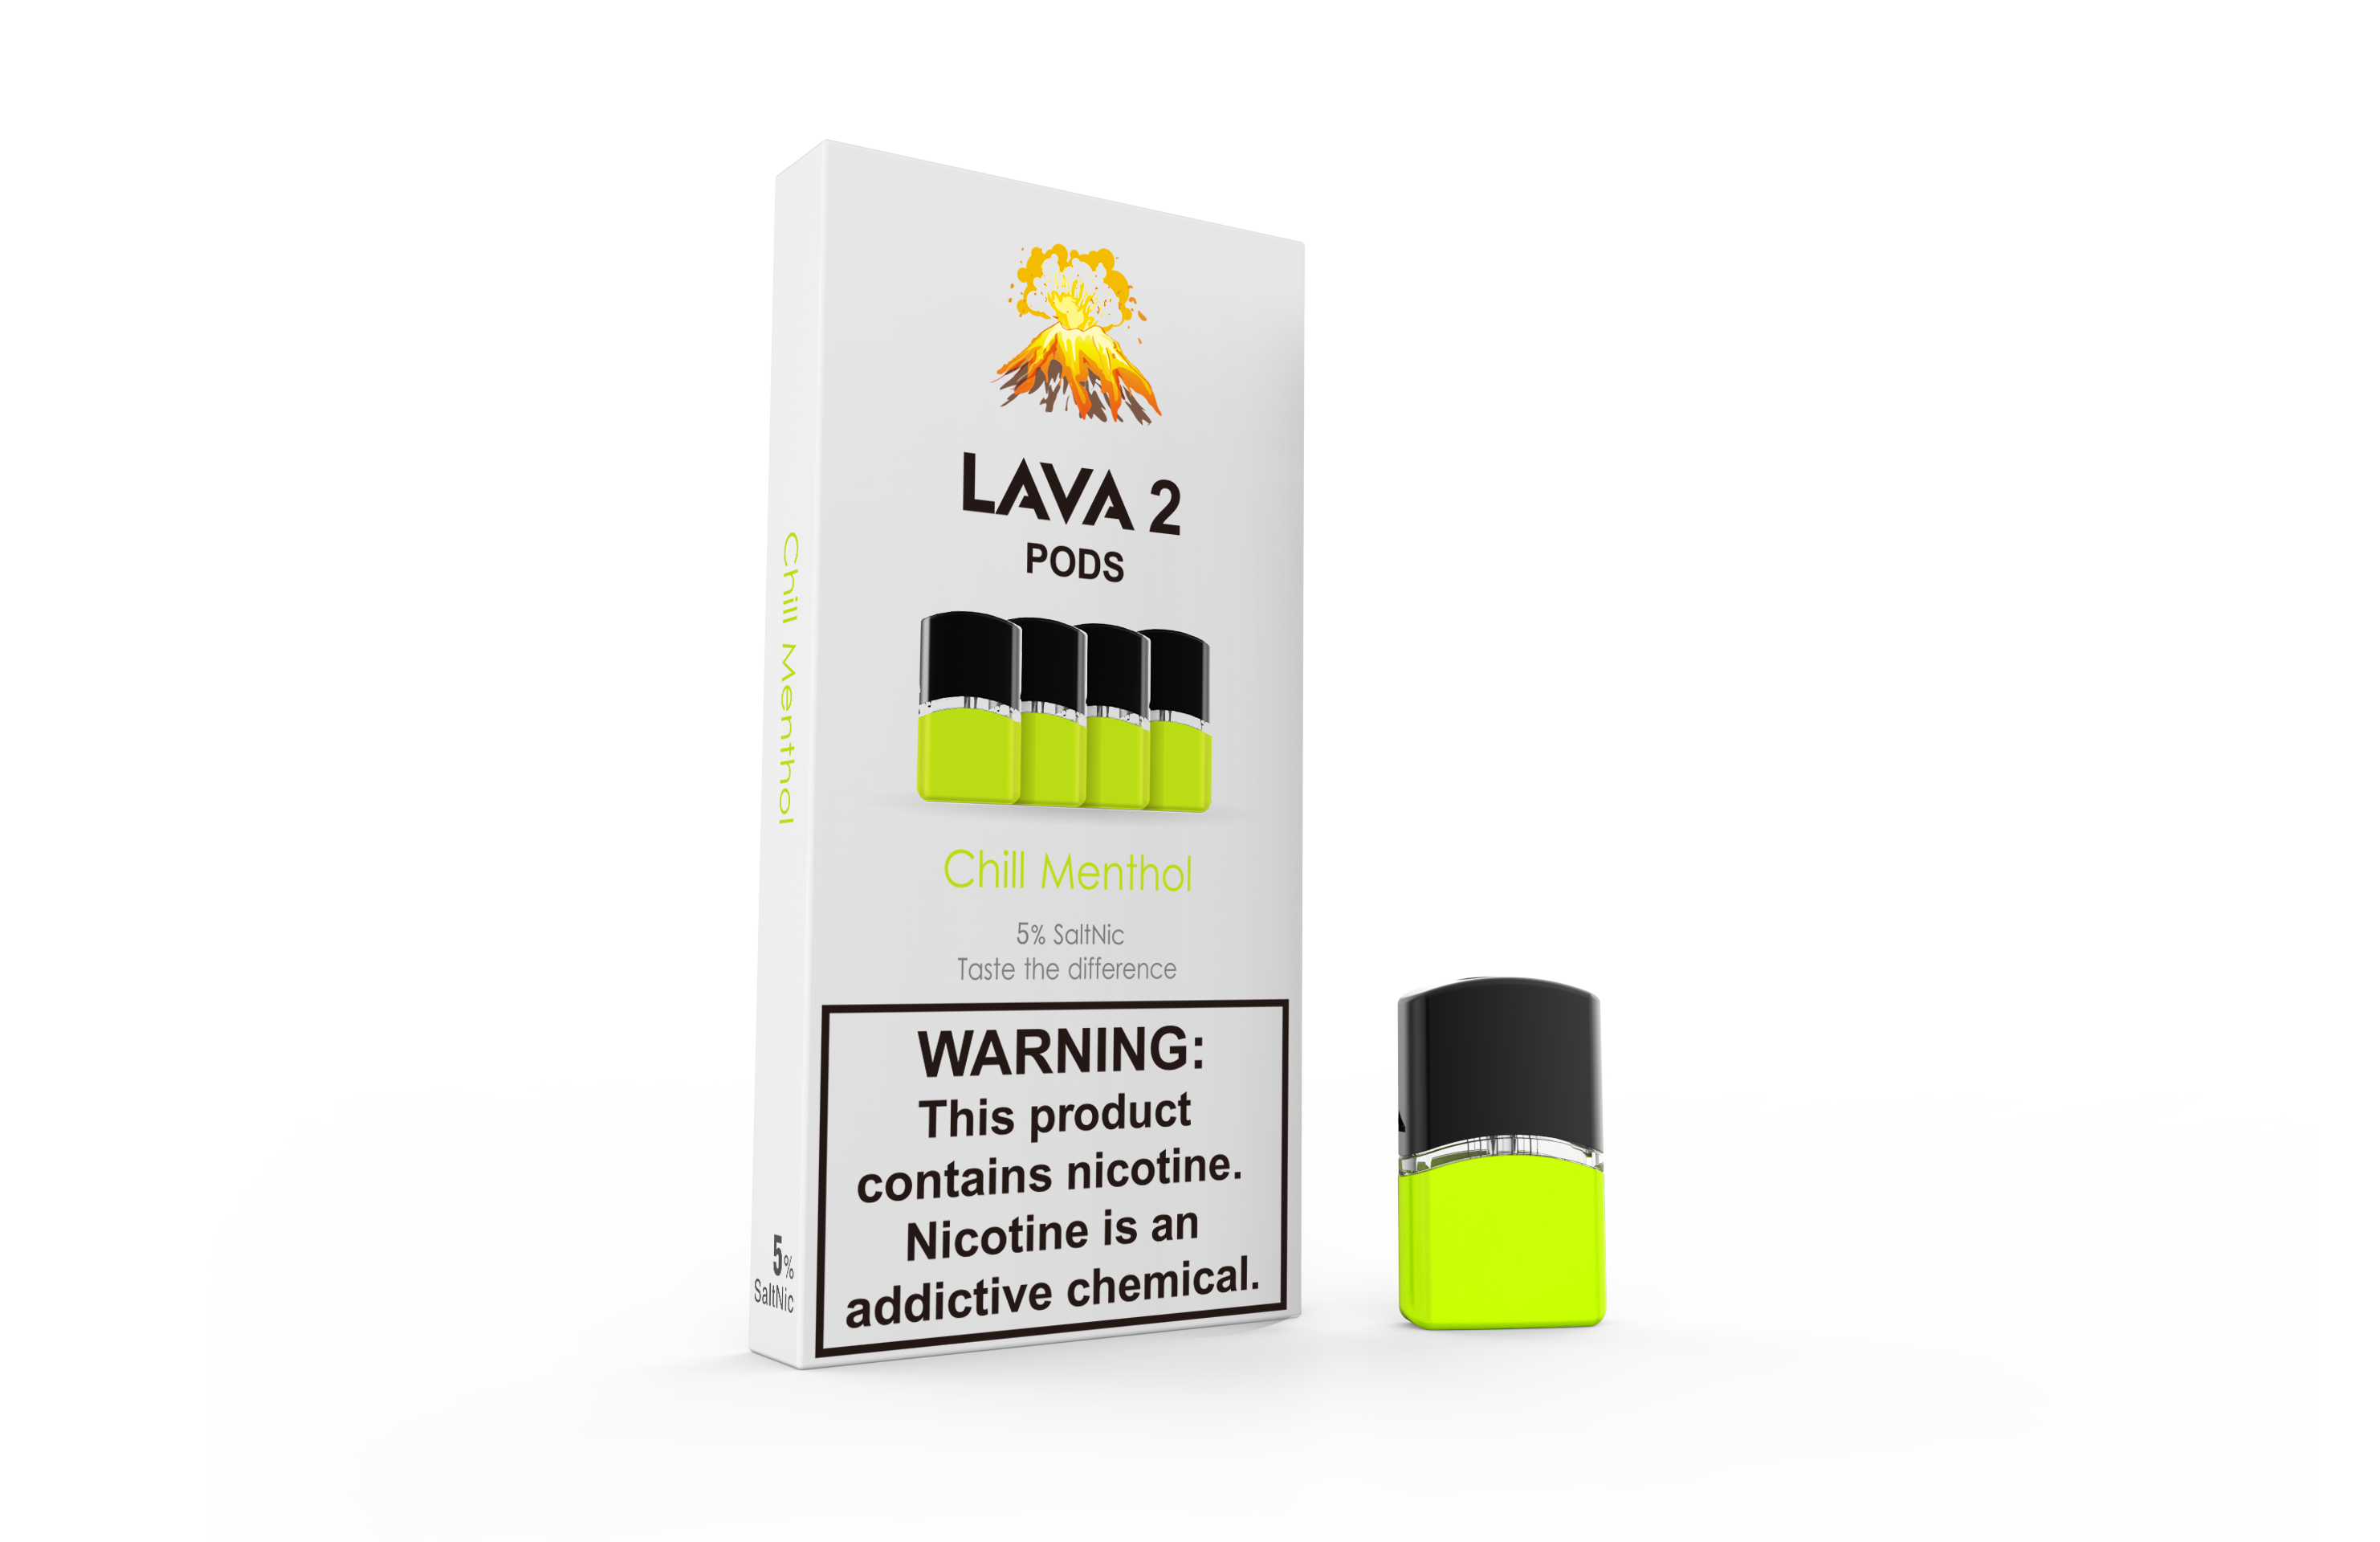 Chill MENTHOL PODS (Pack of 4) | 5% (50mg) Salt Nicotine by LAVA2